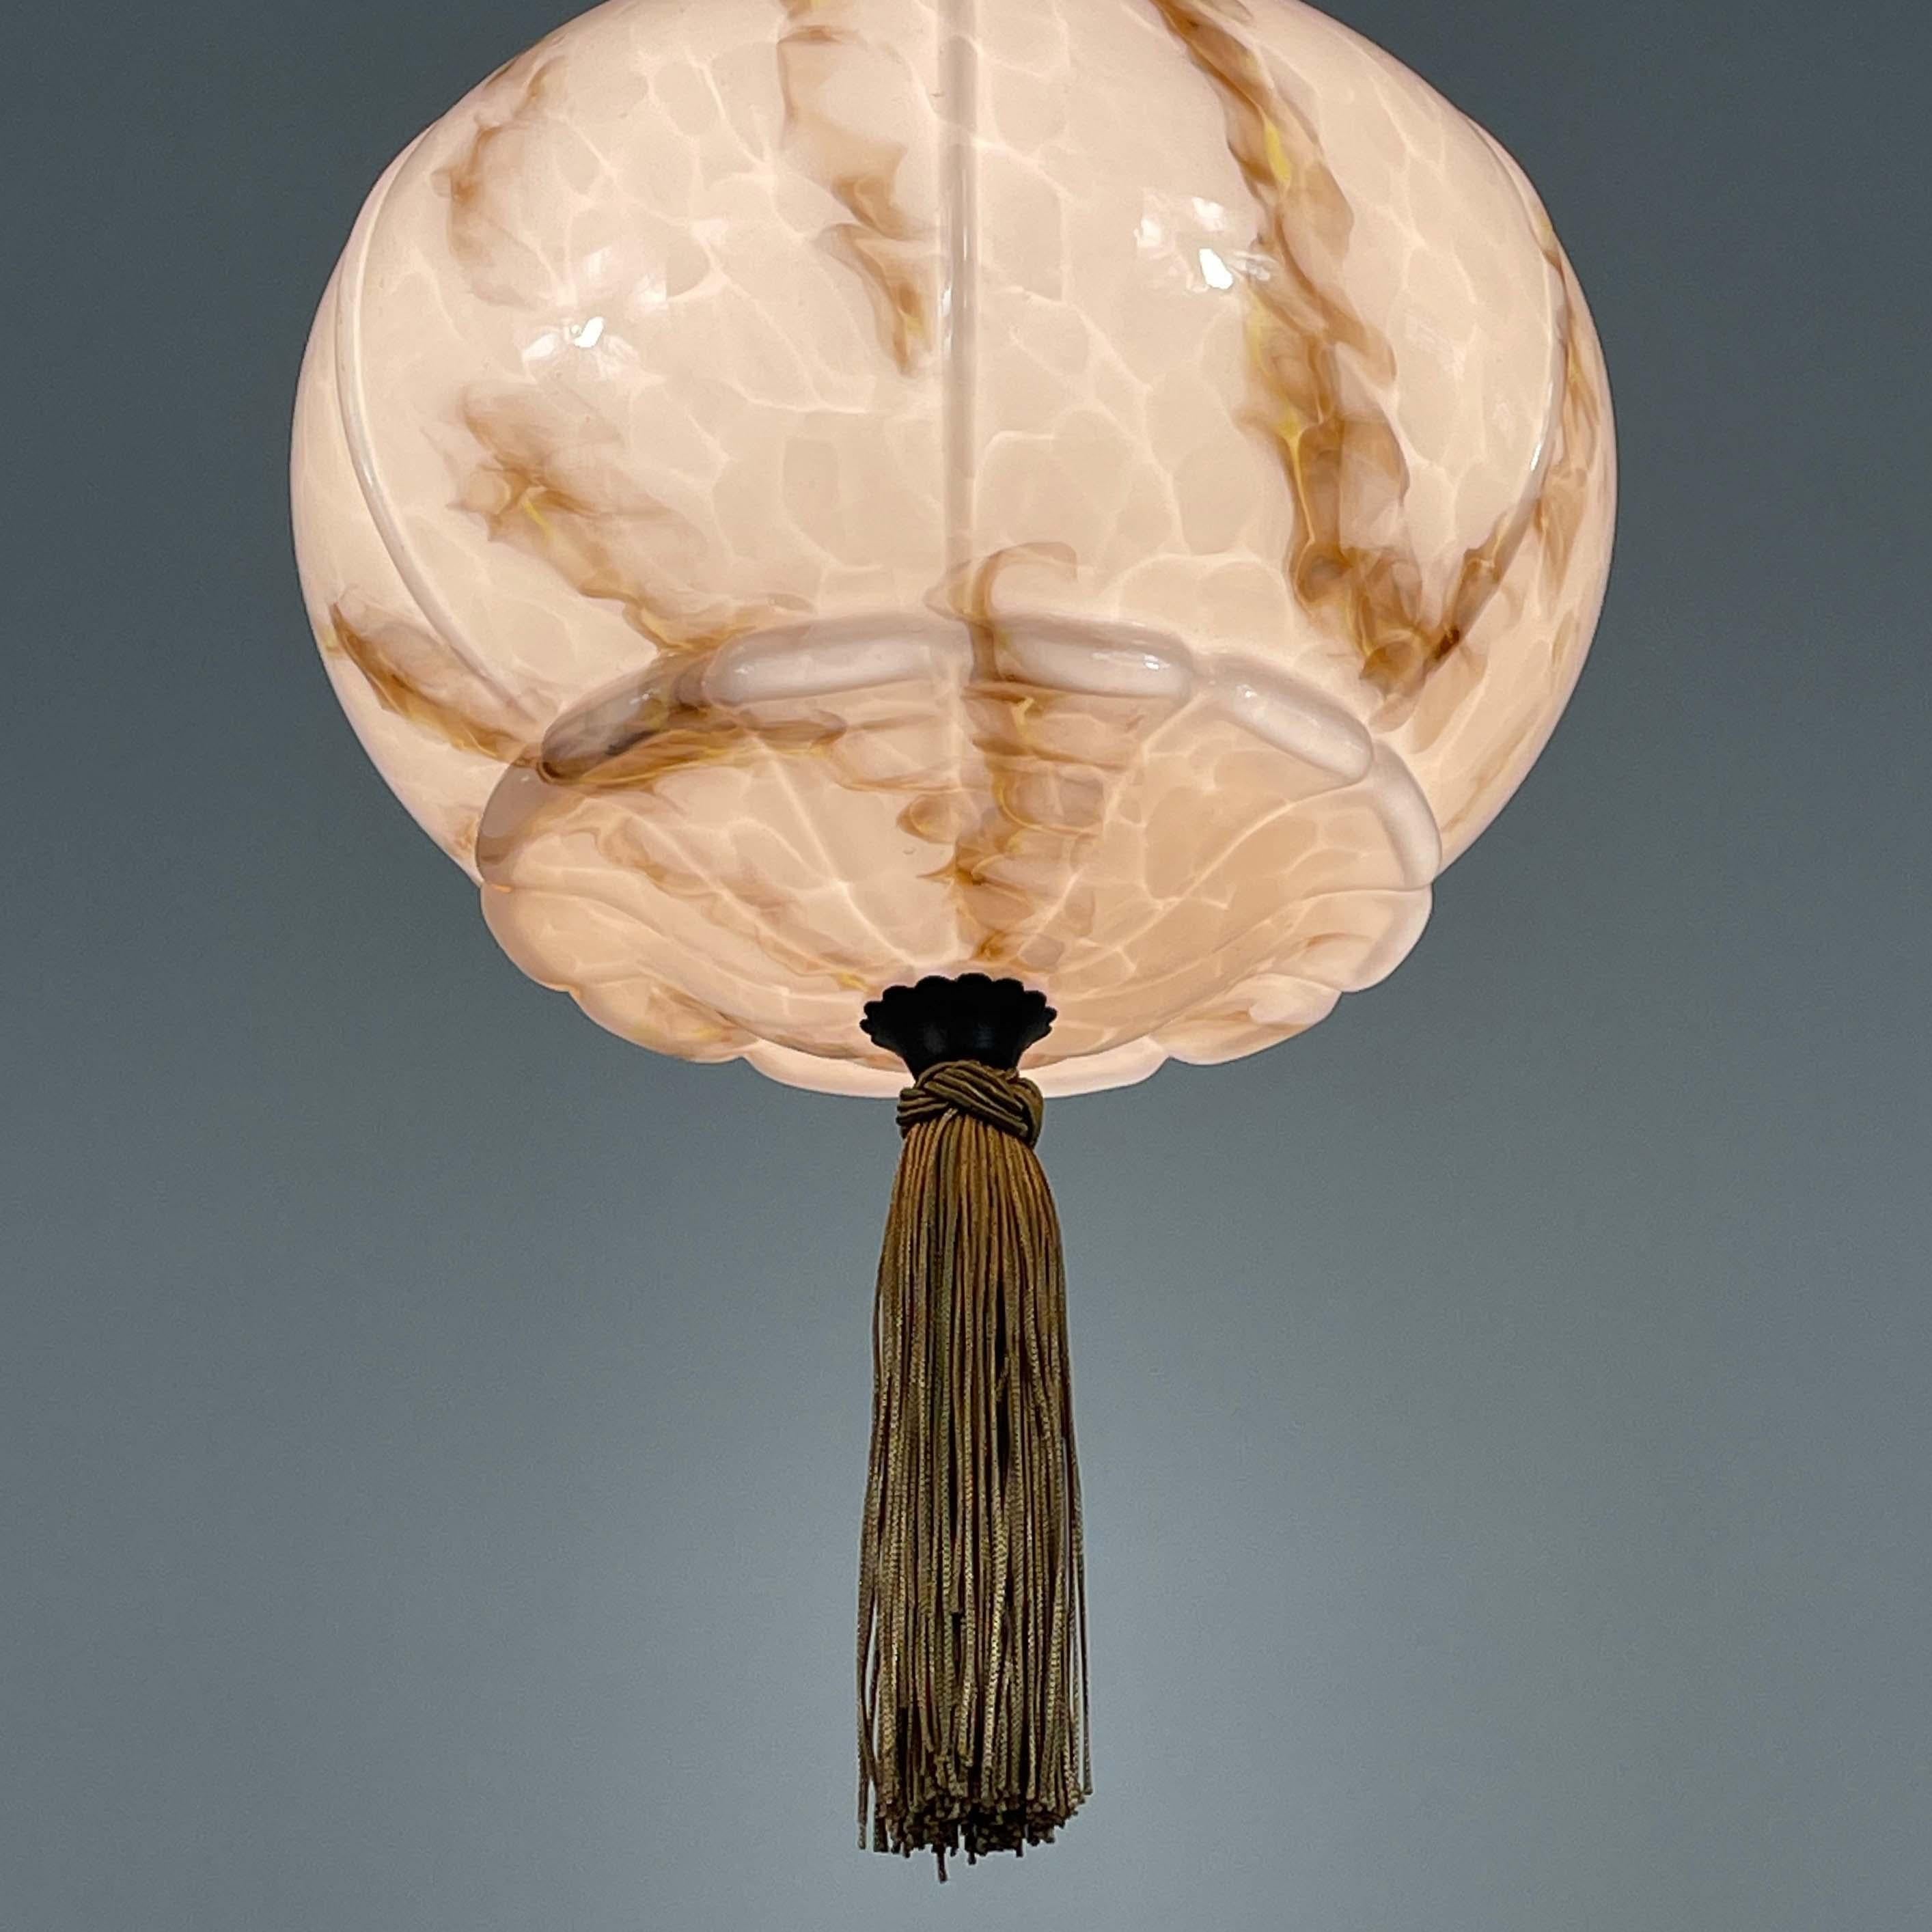 Marbled Pale Rose Opaline & Bronzed Pendant with Tassel, Germany 1920s 1930s For Sale 4